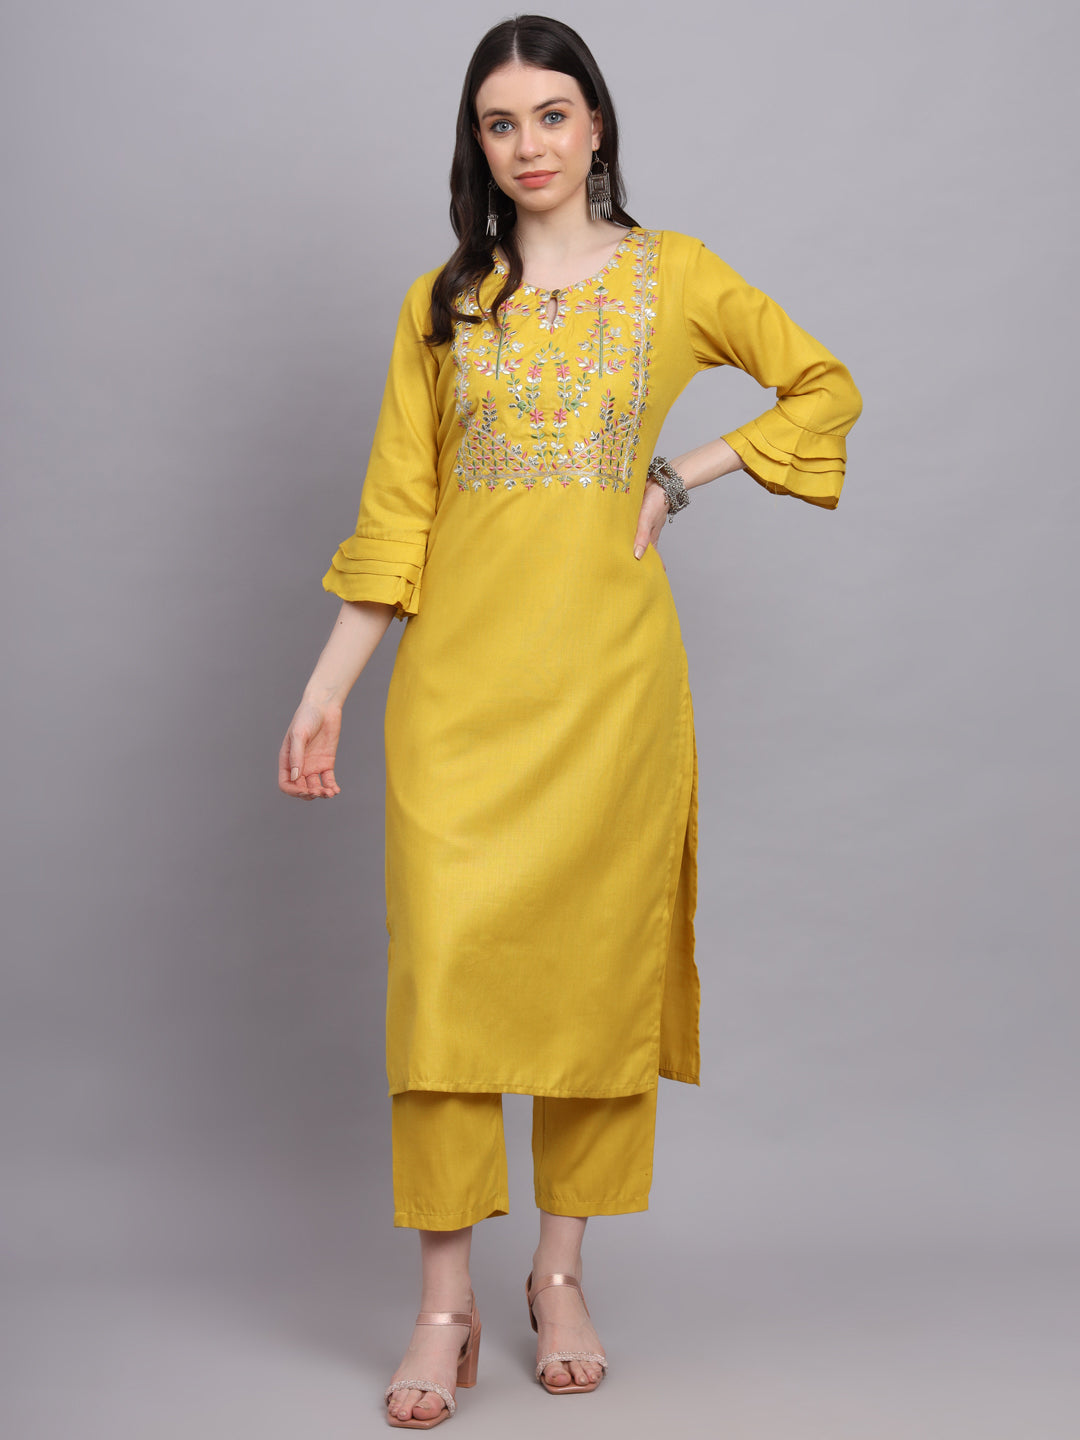 Mellow Yellow Ethnic Attire: Traditional Beauty